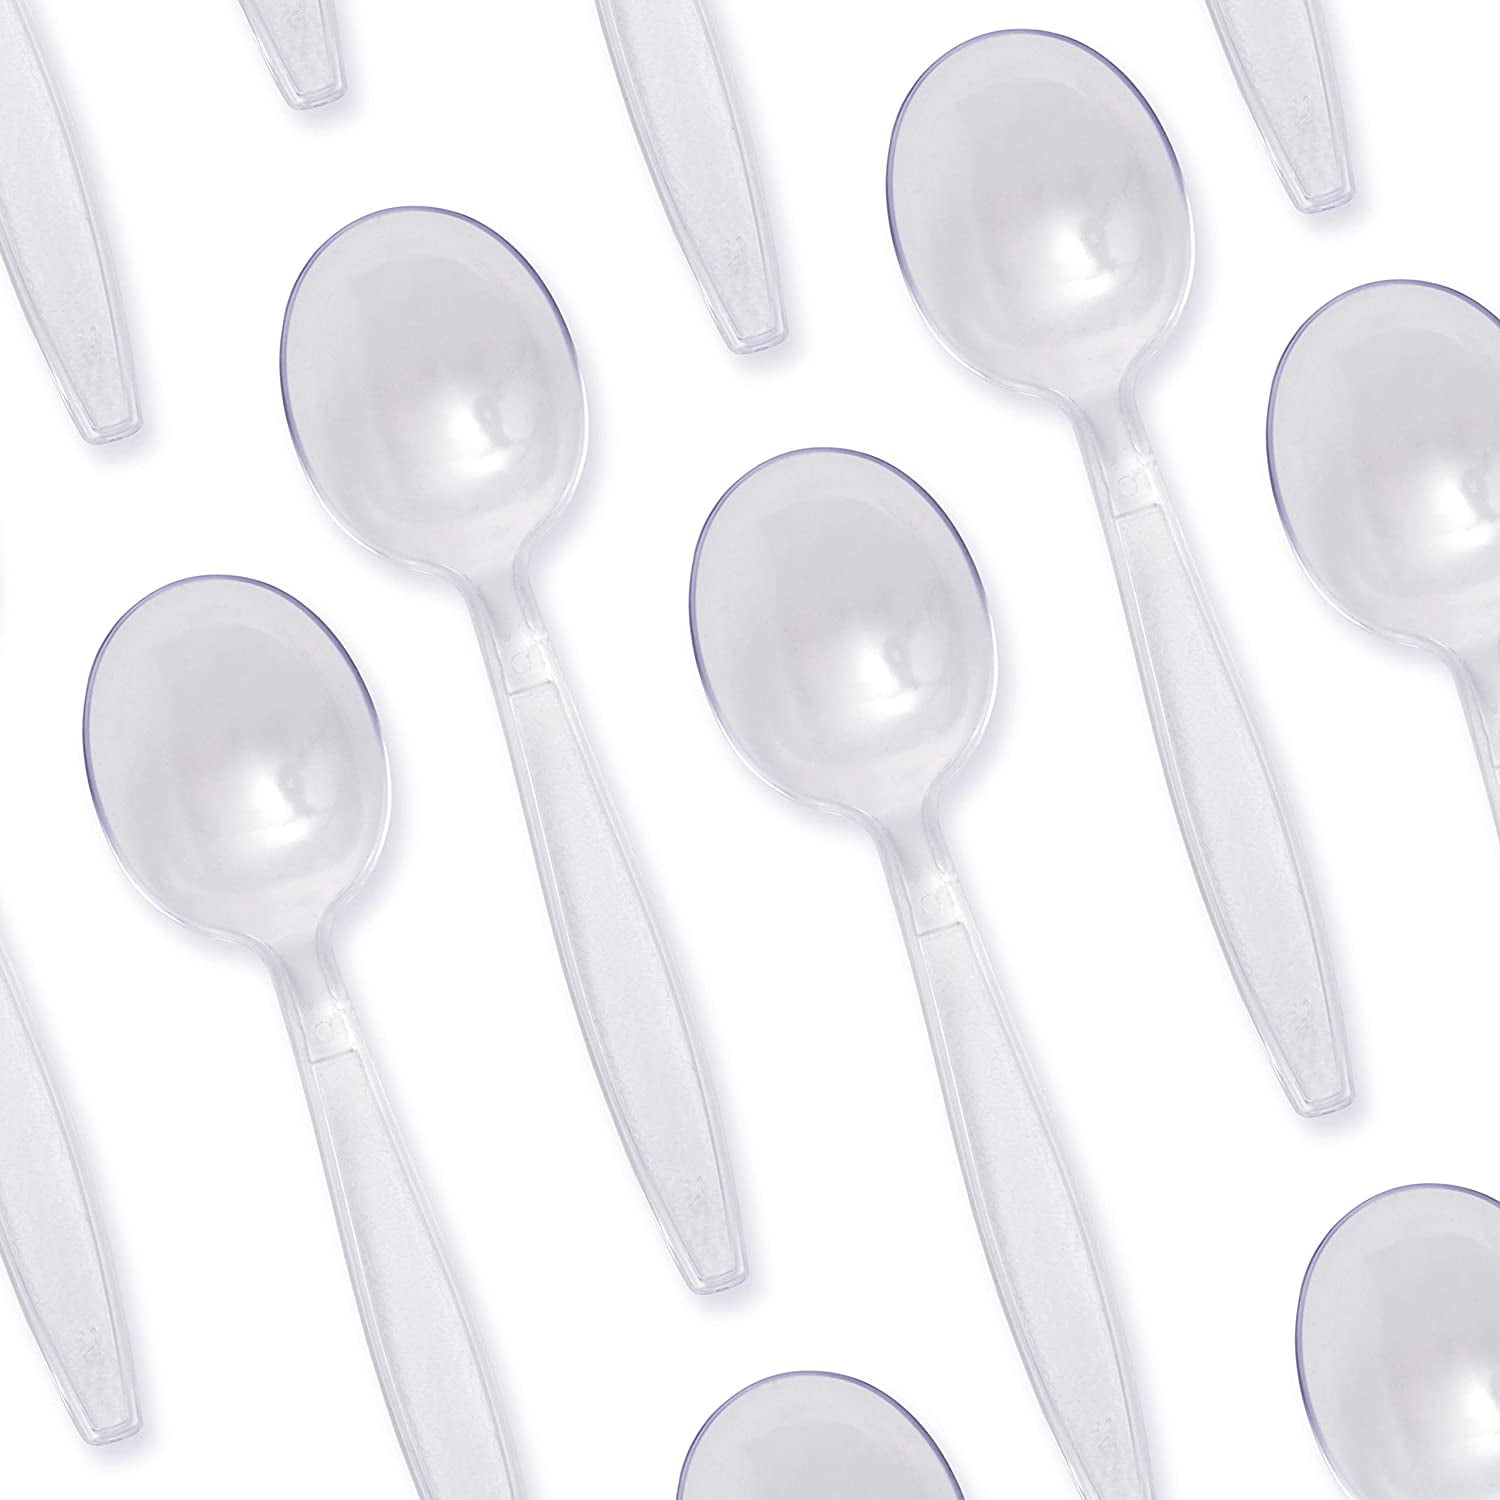 Buy FaisTonGateau Pack of 250 Mini Plastic Spoons Online at